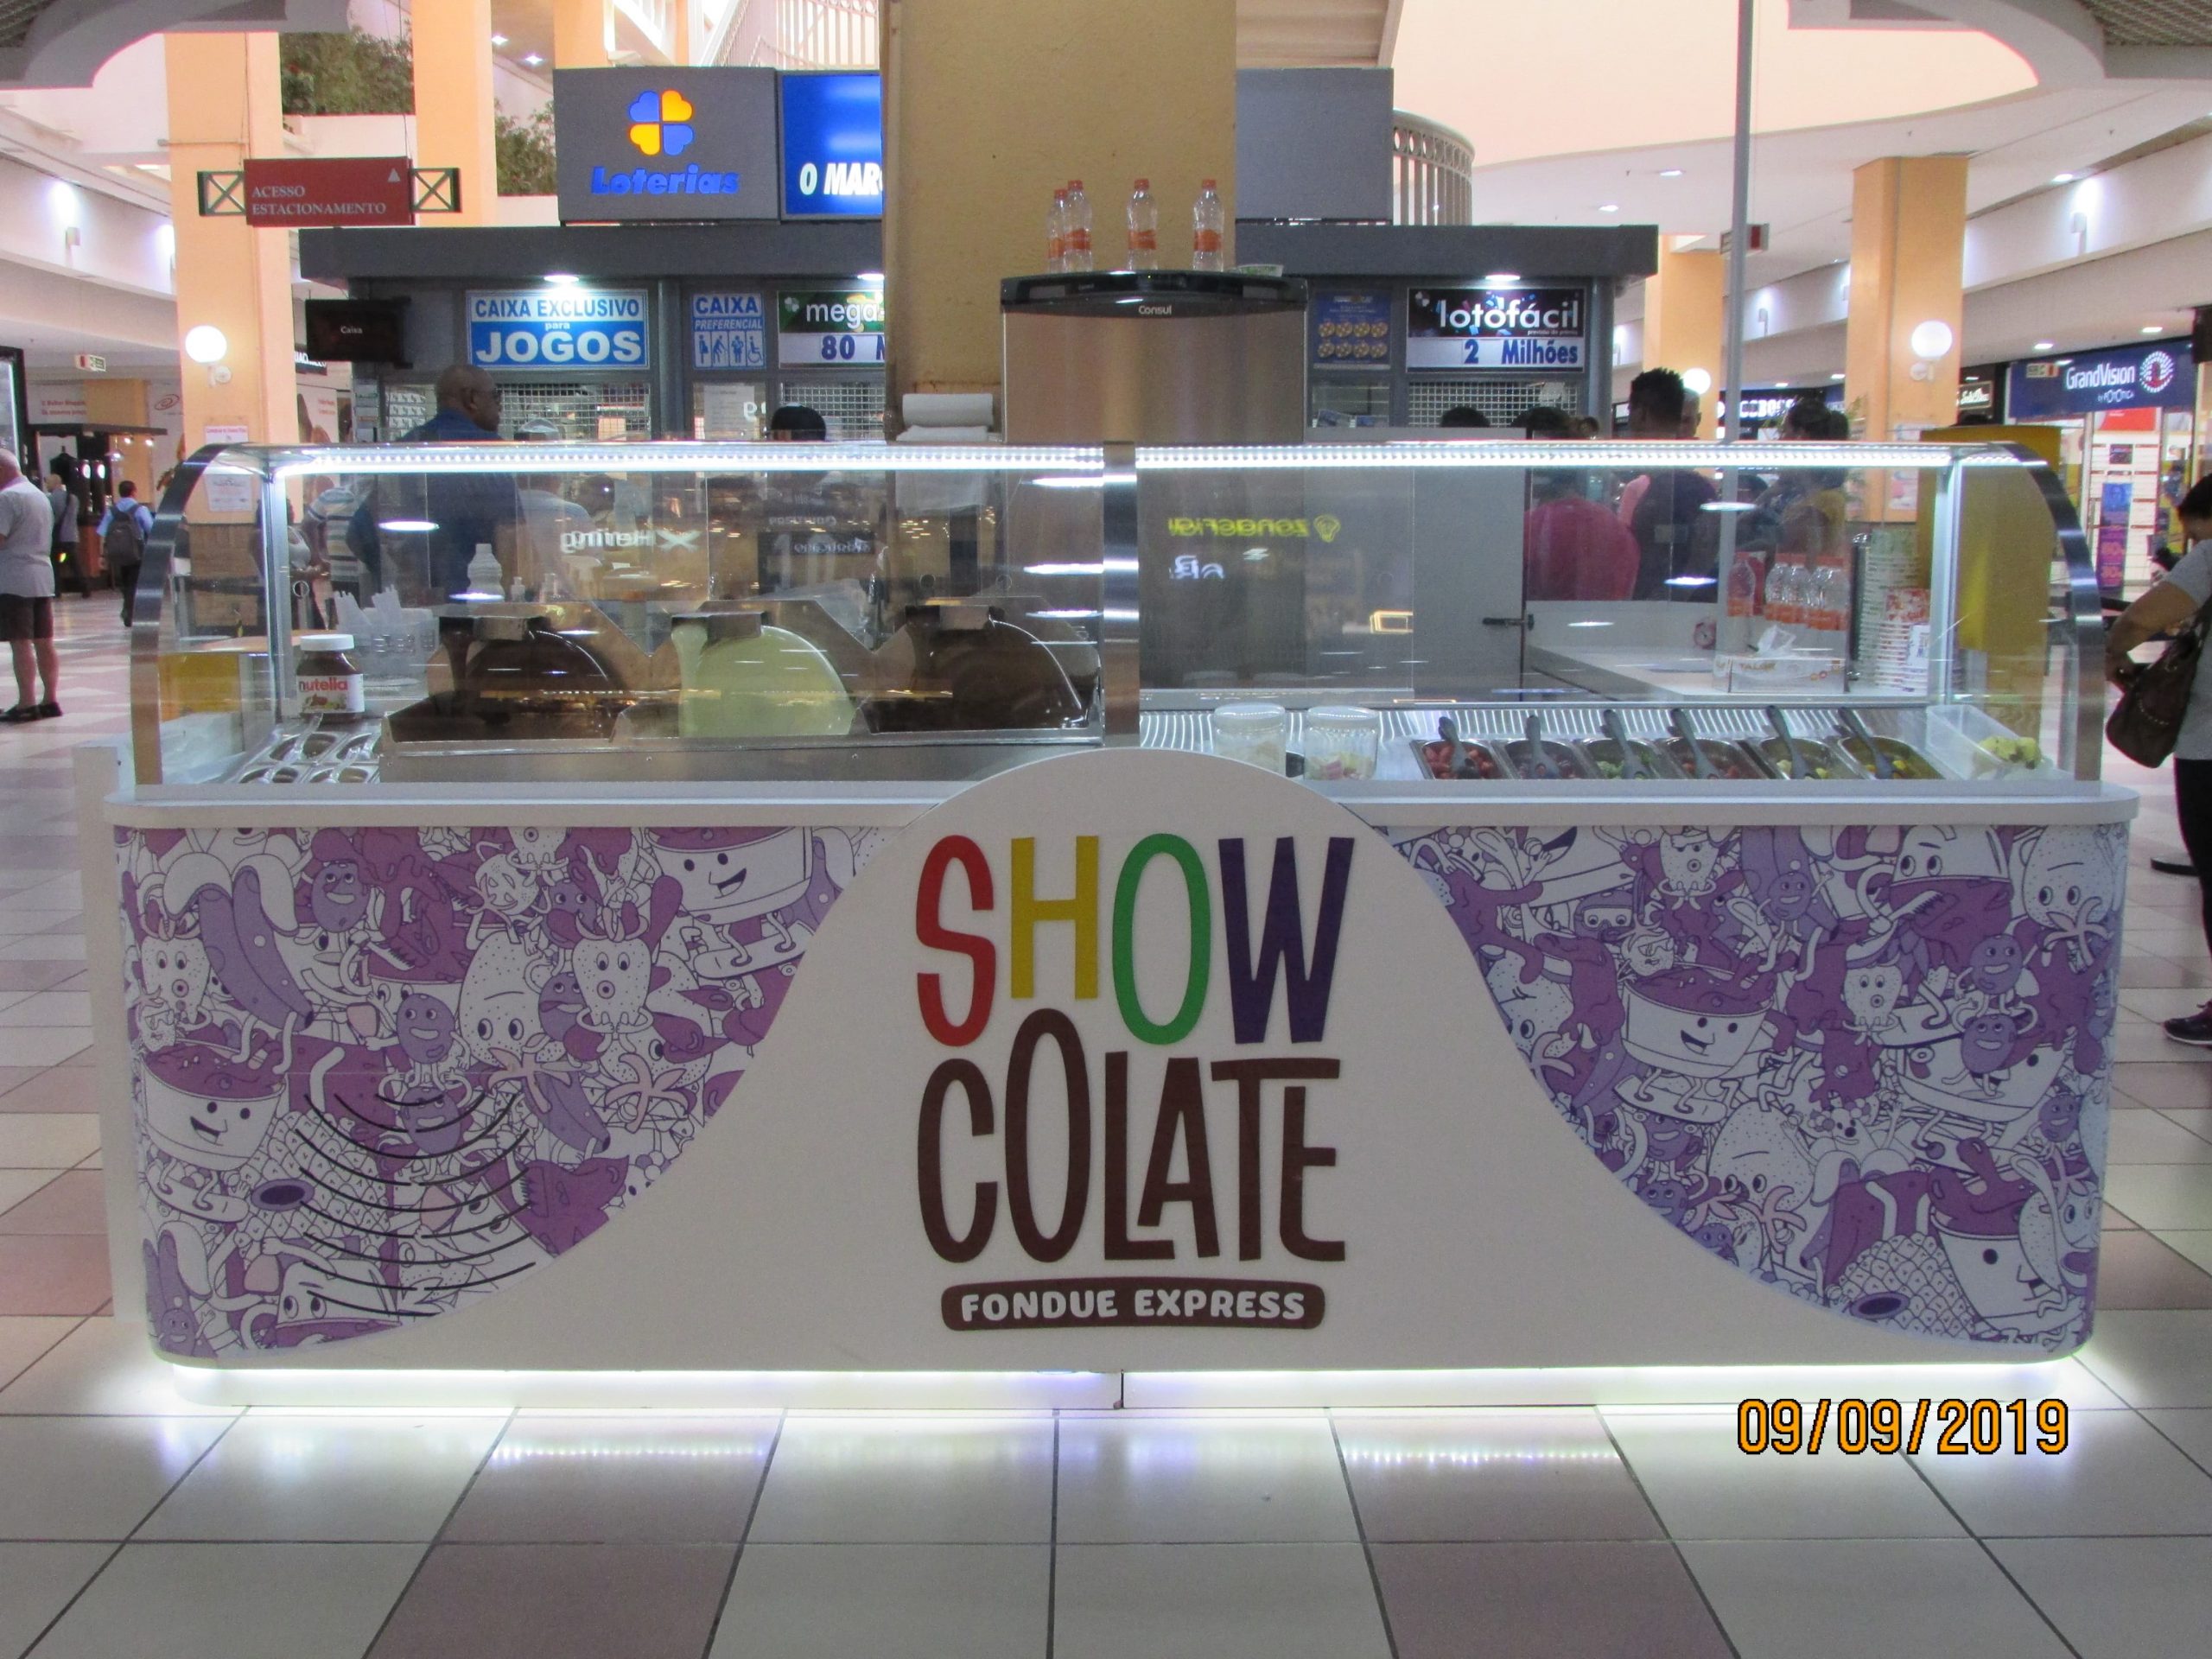 Showcolate